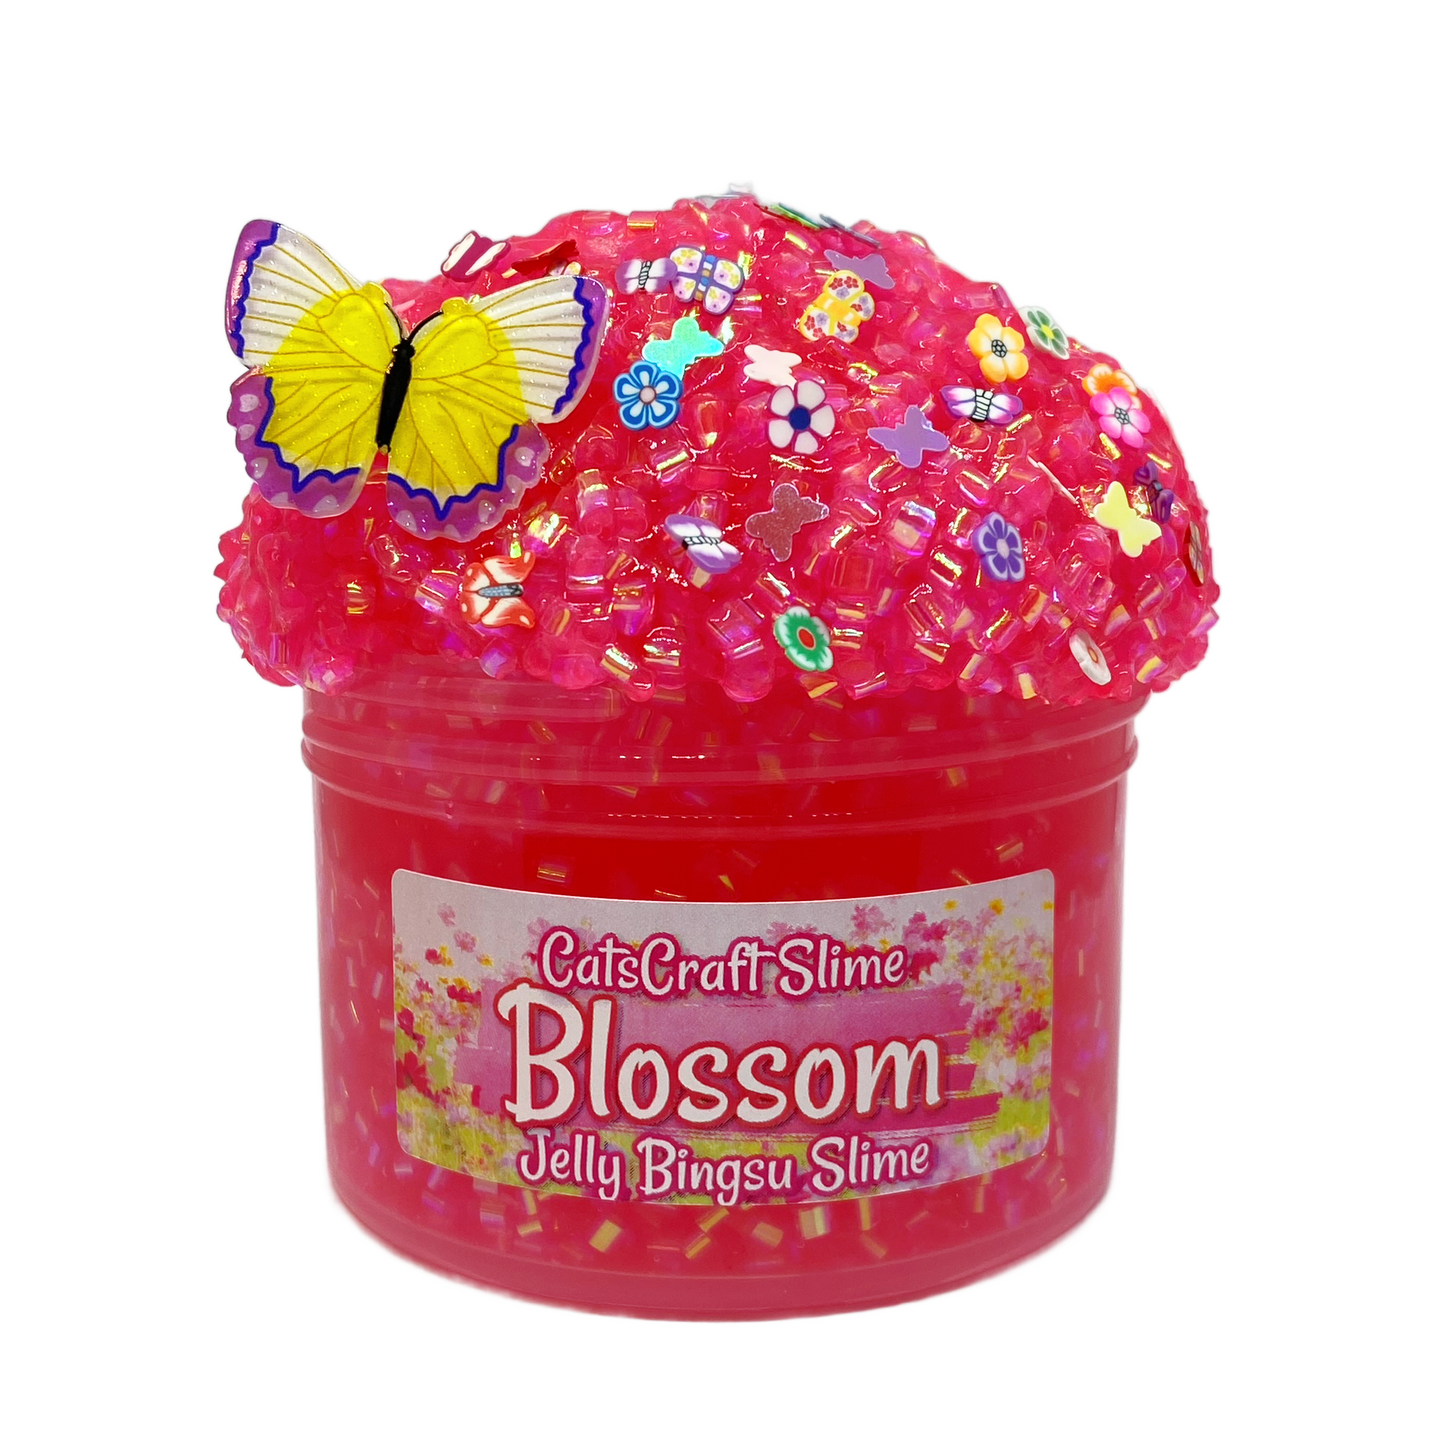 Jelly Bingsu Slime "Blossom" SCENTED clear jelly slime and bingsu bead pink crunchy ASMR With Butterfly Charm